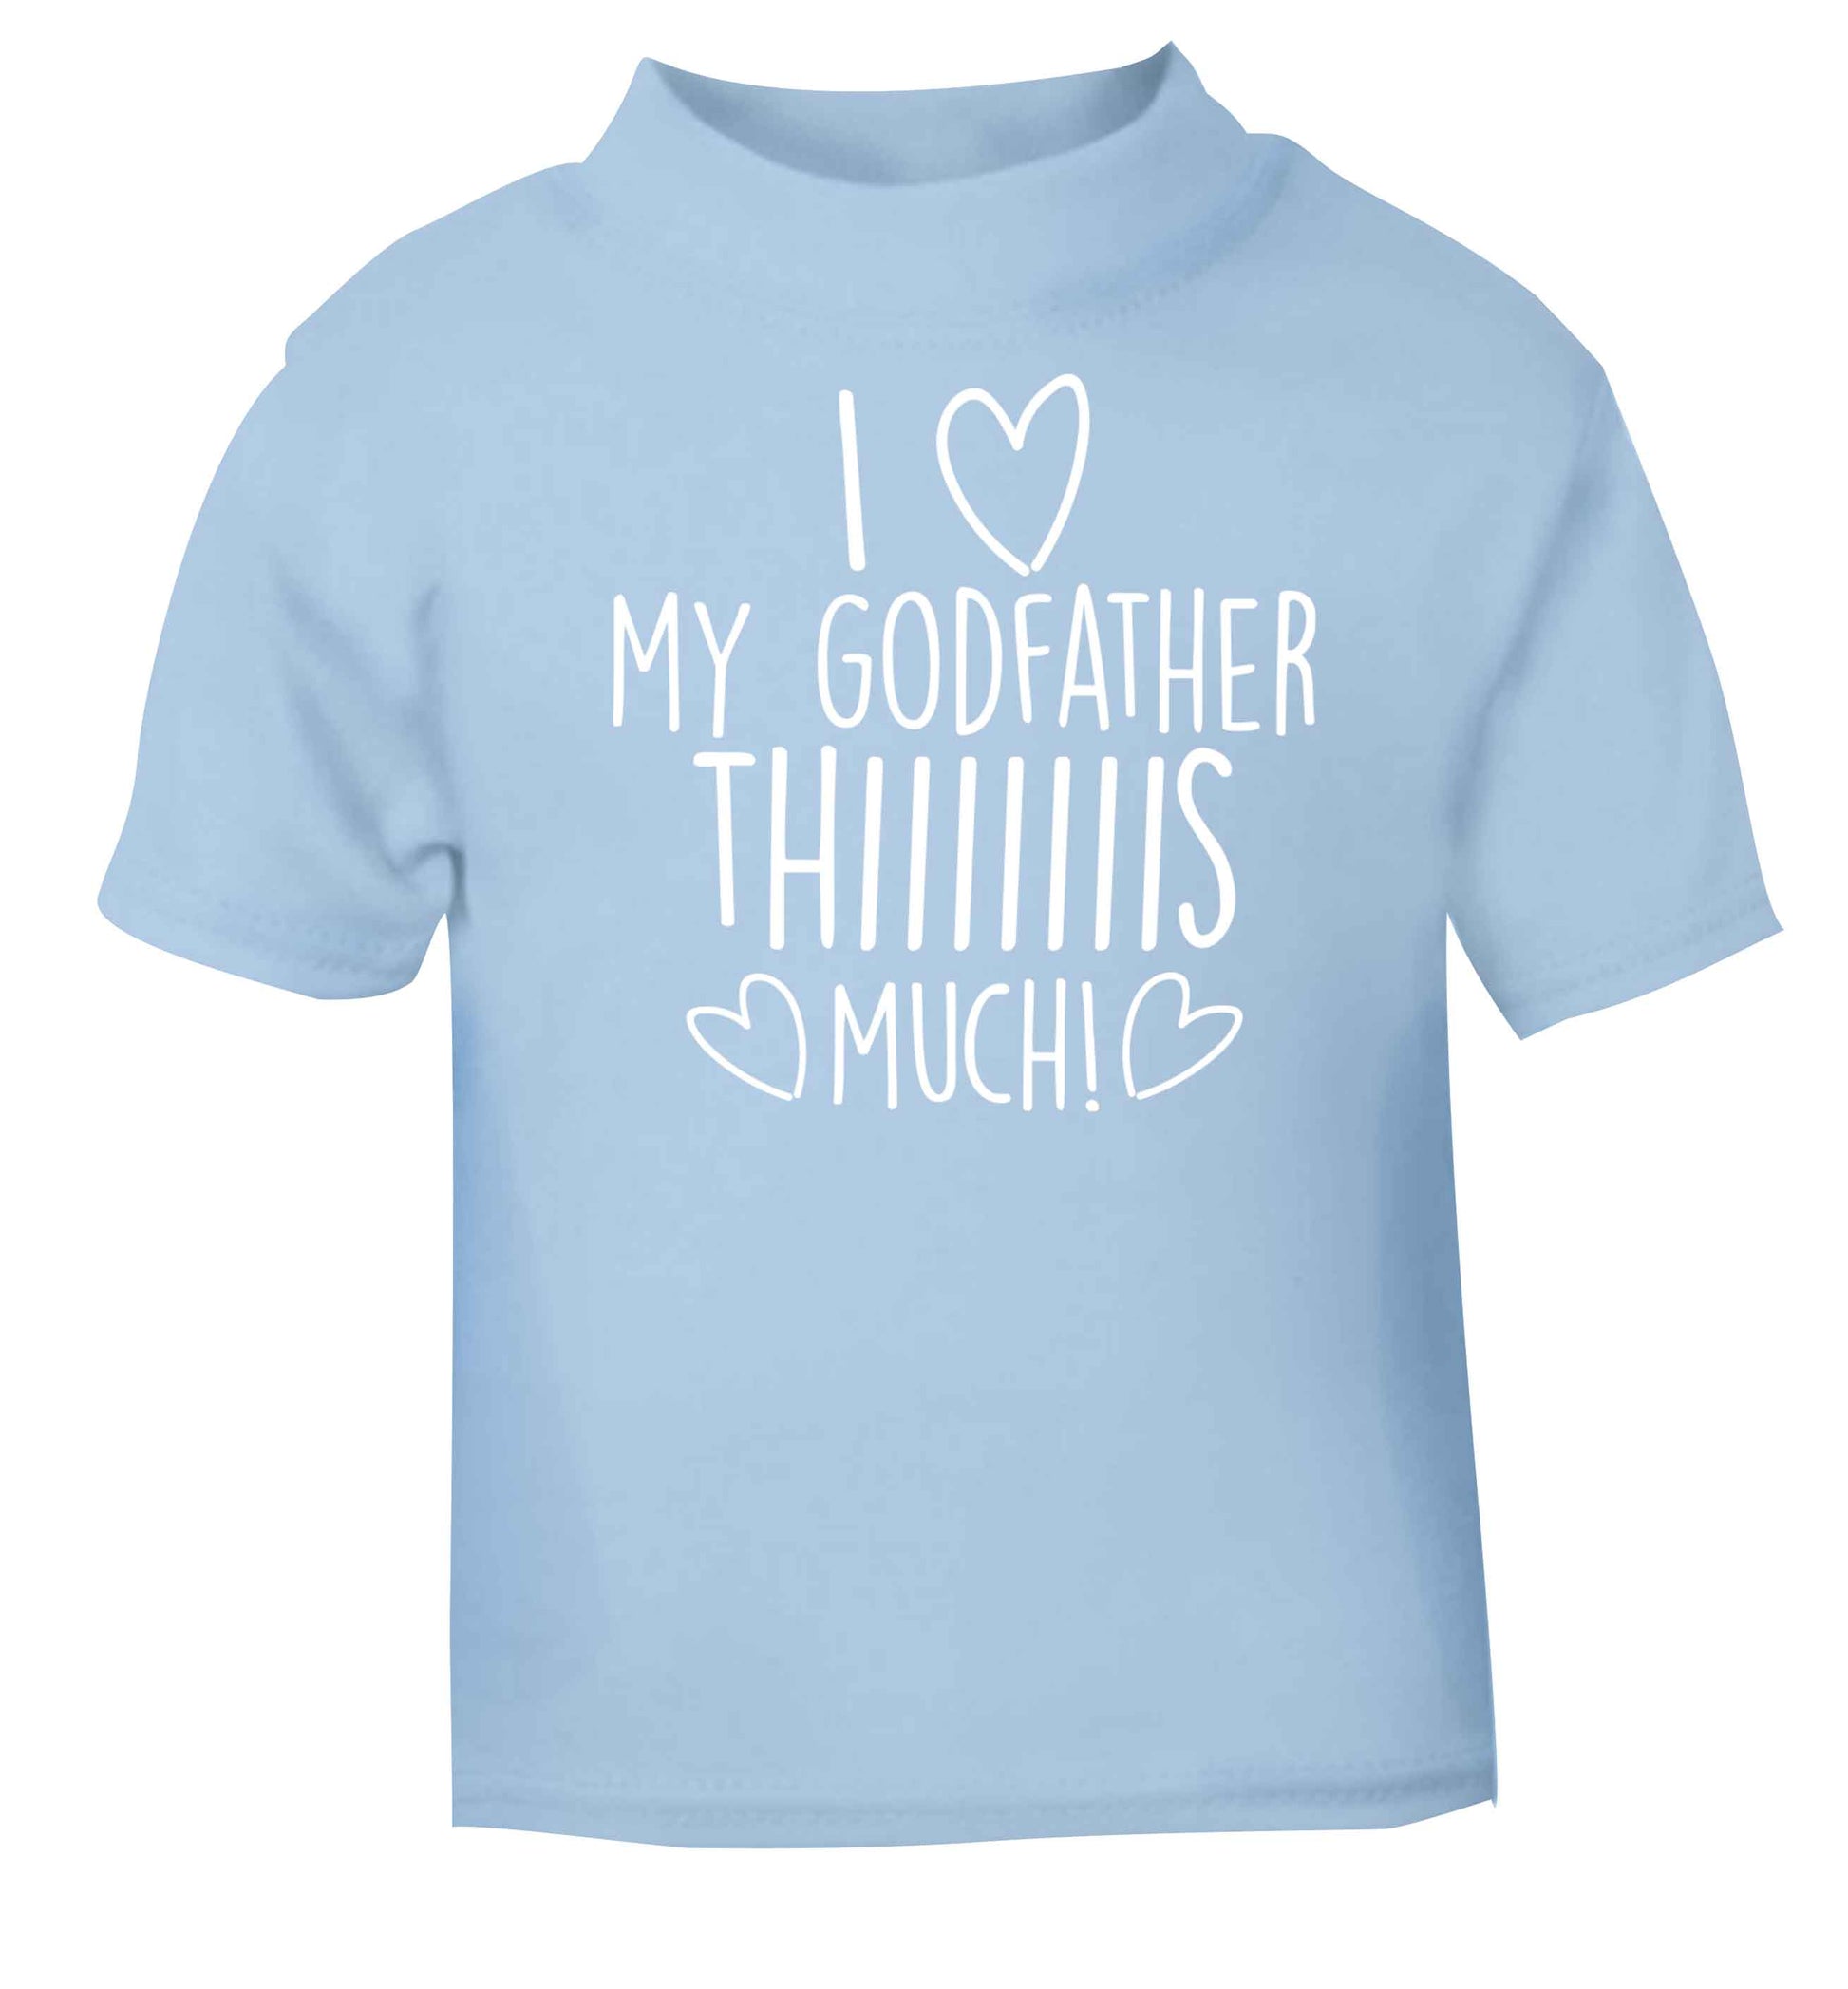 I love my Godfather this much light blue baby toddler Tshirt 2 Years